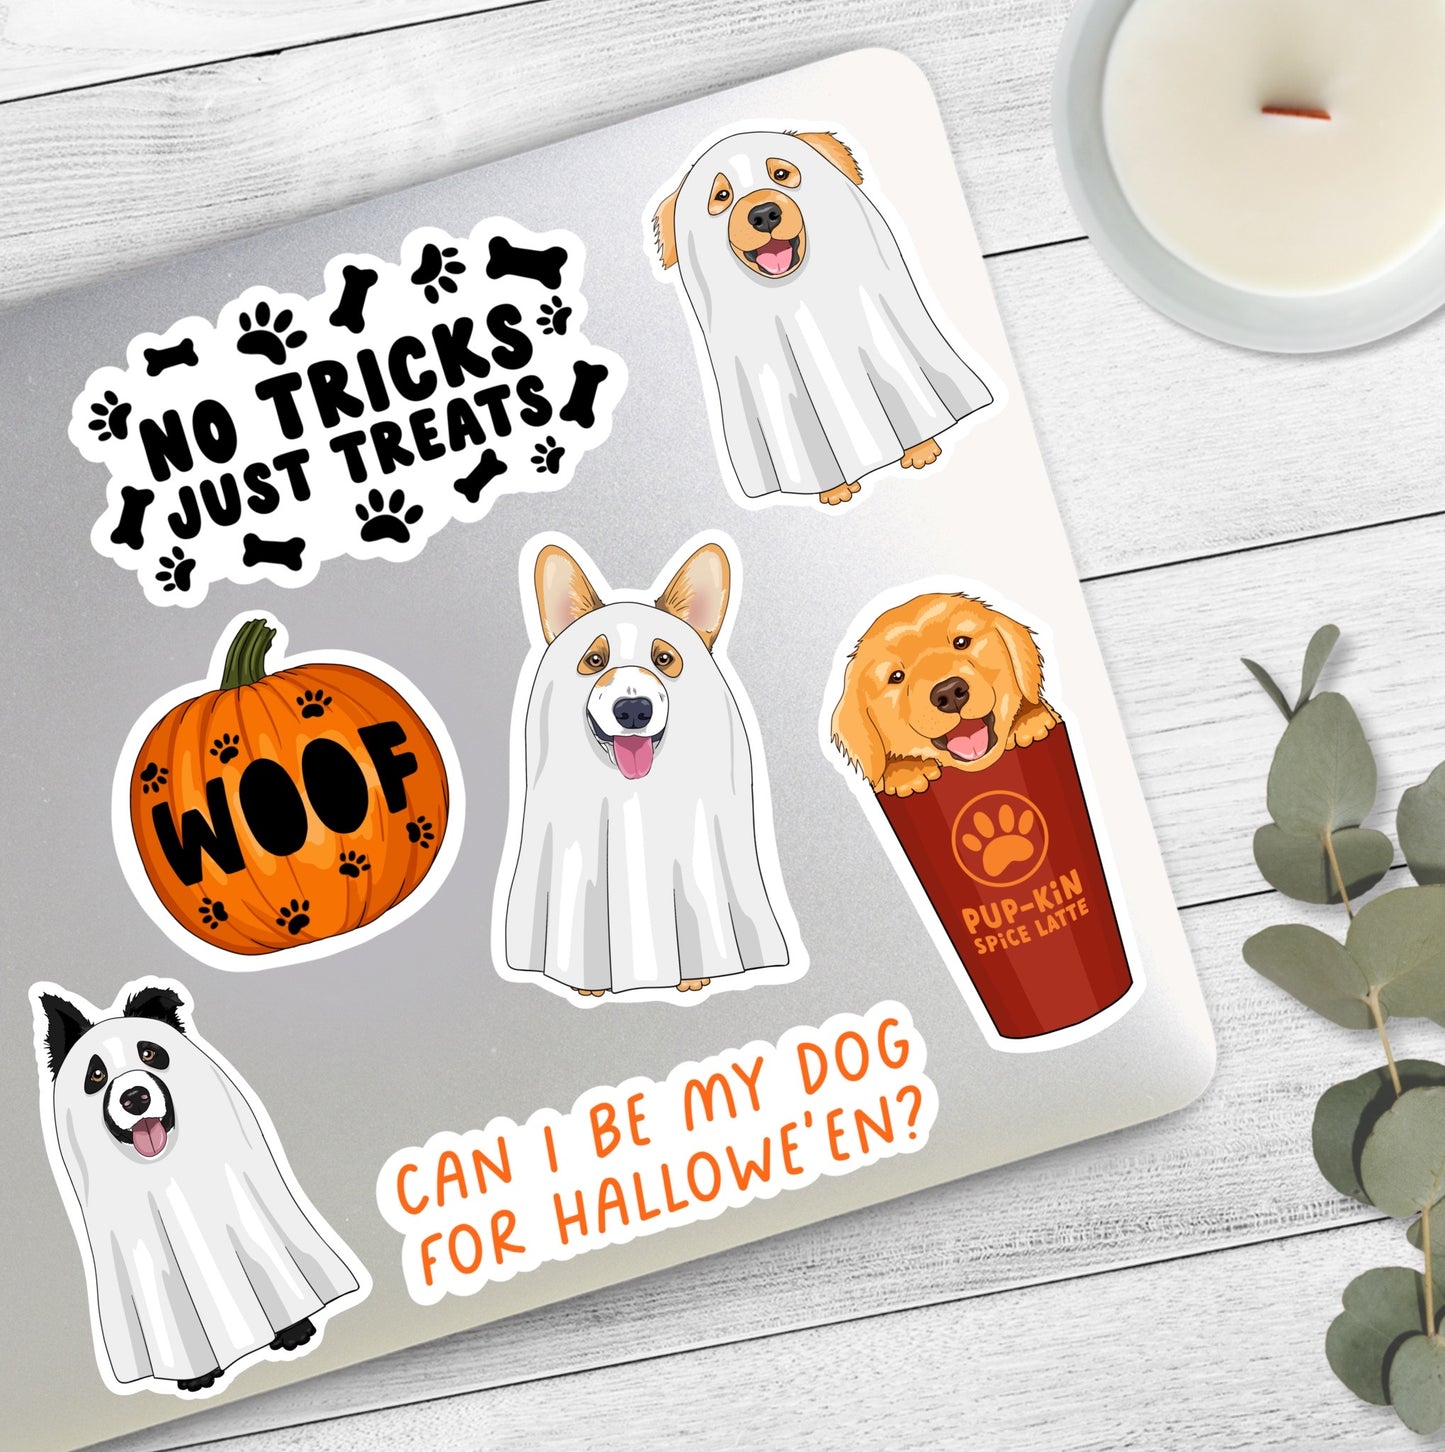 Can I Be My Dog for Halloween? | Spooky Pals